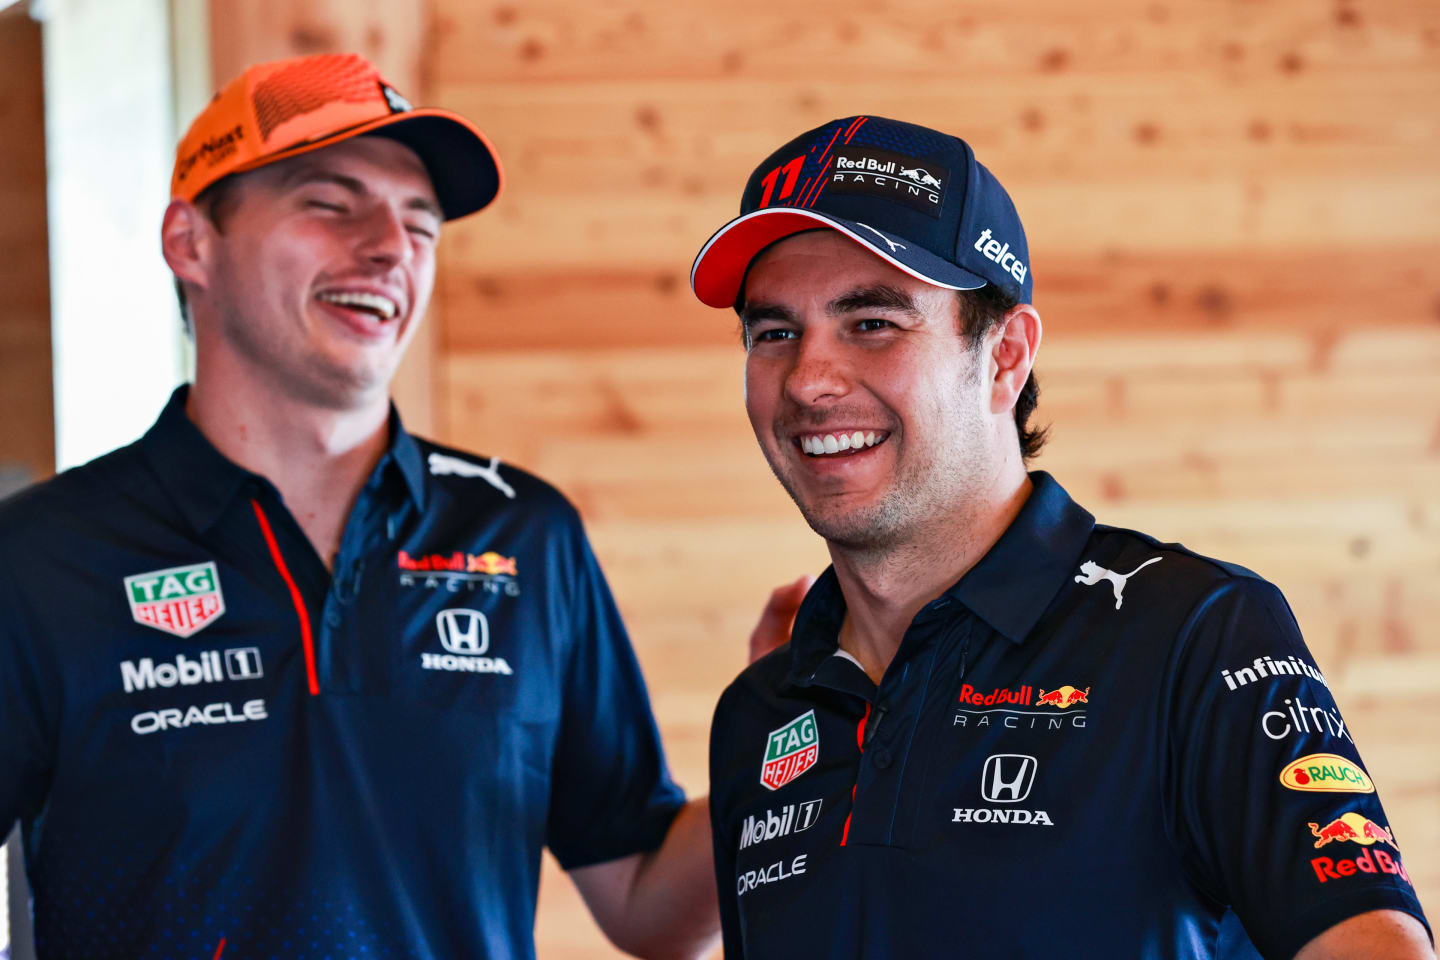 SPIELBERG, AUSTRIA - JUNE 24: Max Verstappen of Netherlands and Red Bull Racing and Sergio Perez of